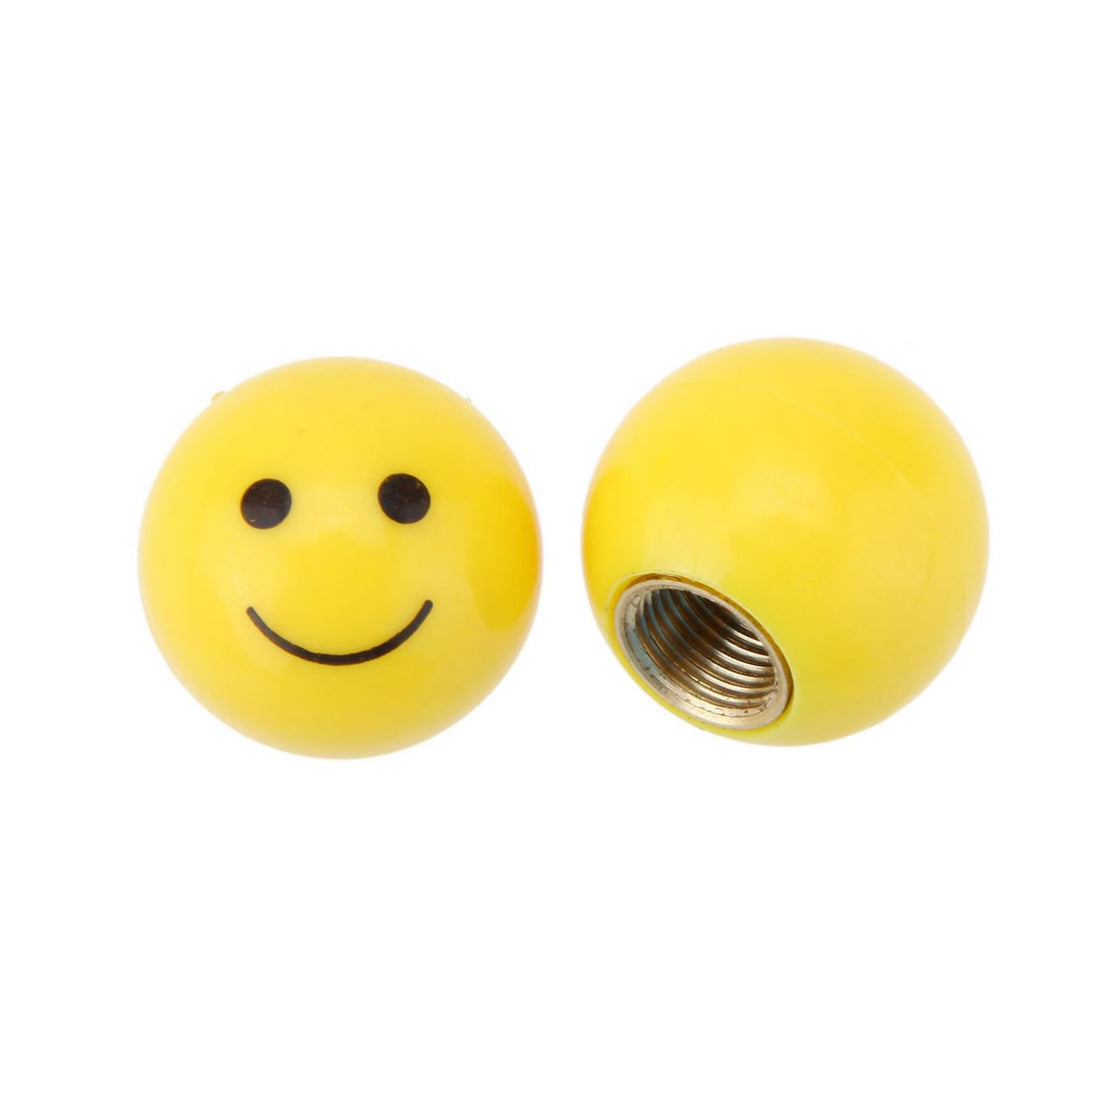 Smiley Face - Bike Valve Covers - Set of 4